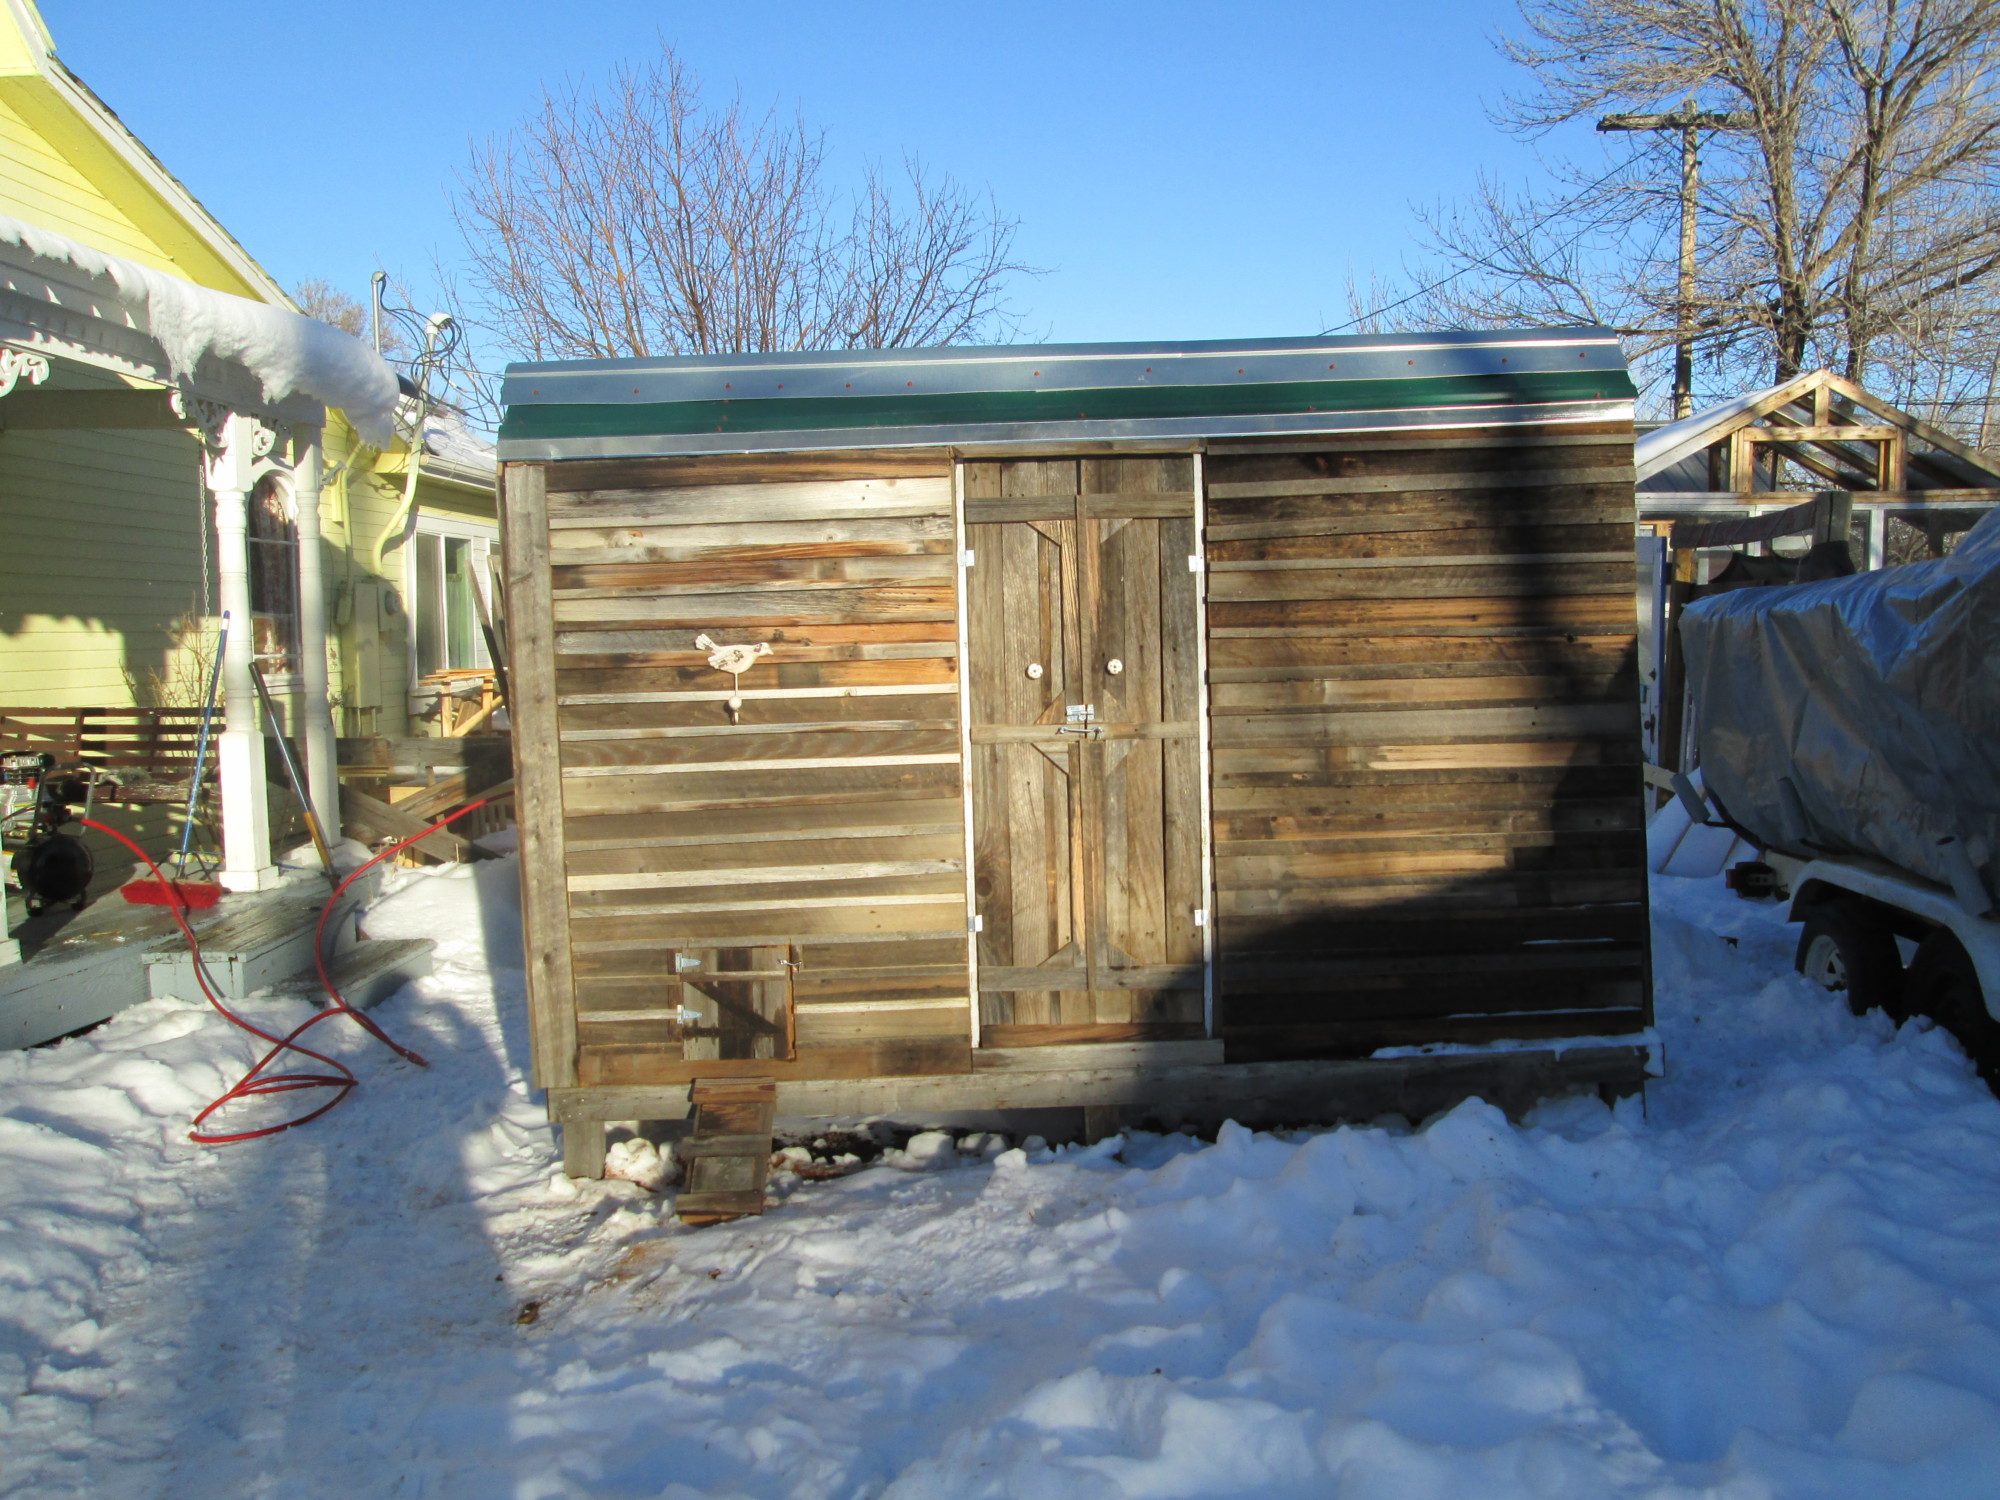 Extra Extra large coop with doors that close and cover window that is a vent